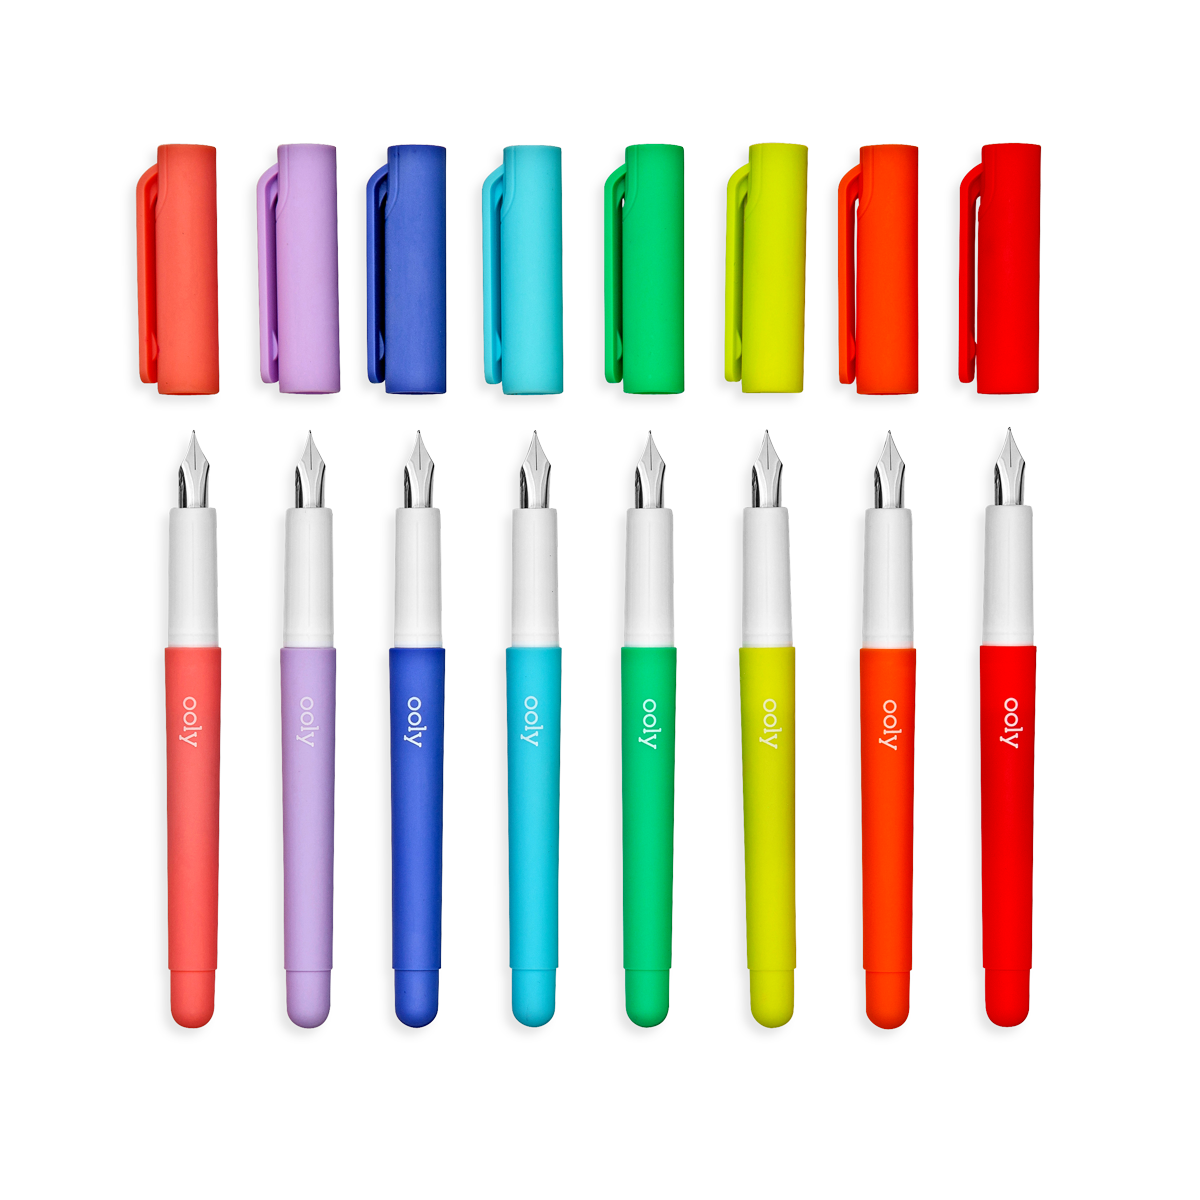 Color Write Fountain Pens set of 8 shown with their caps off to see the nibs